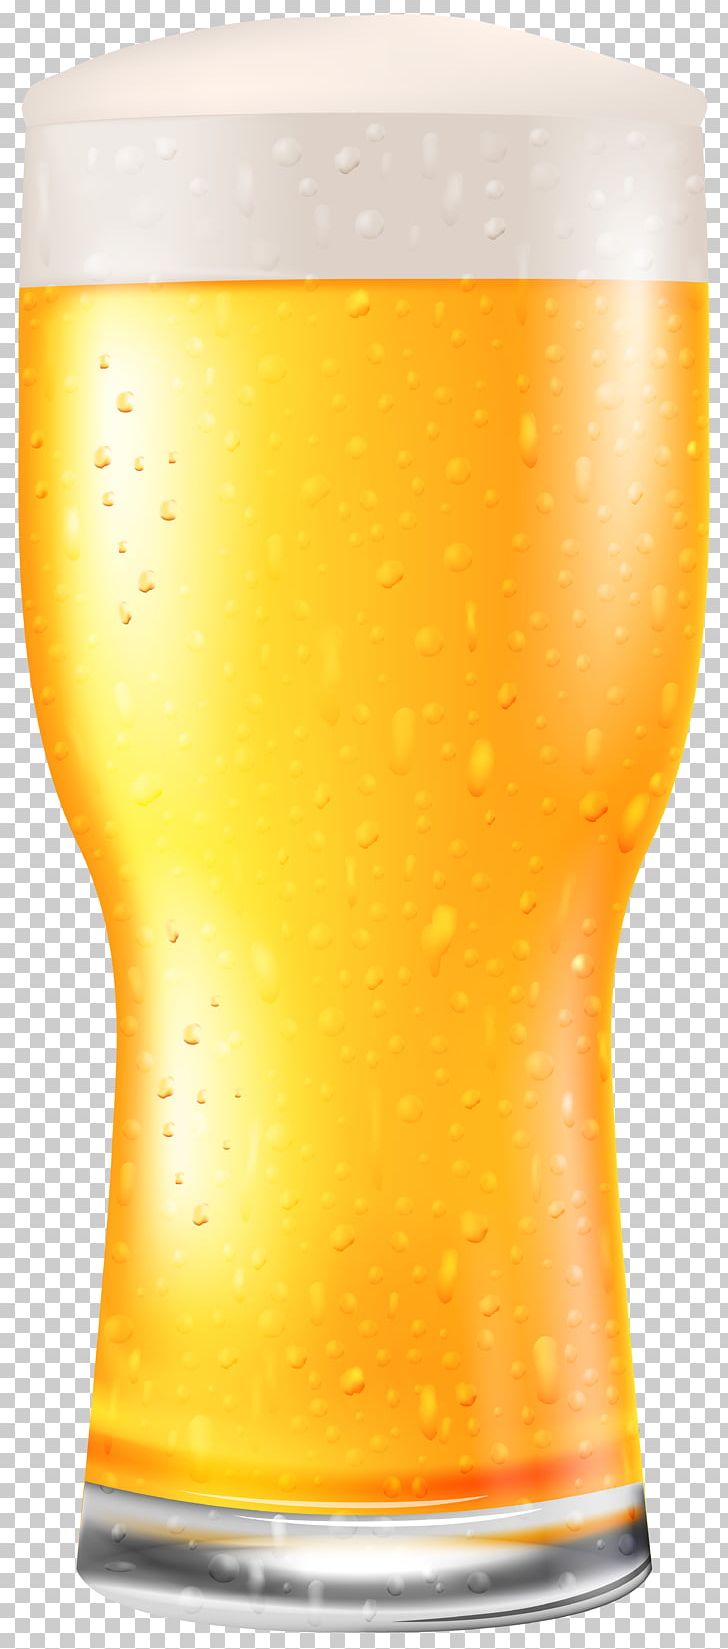 Wheat Beer Orange Juice Soft Drink PNG, Clipart, Alcoholic Drink, Alcoholism, Beer, Beer Glass, Beer Glasses Free PNG Download